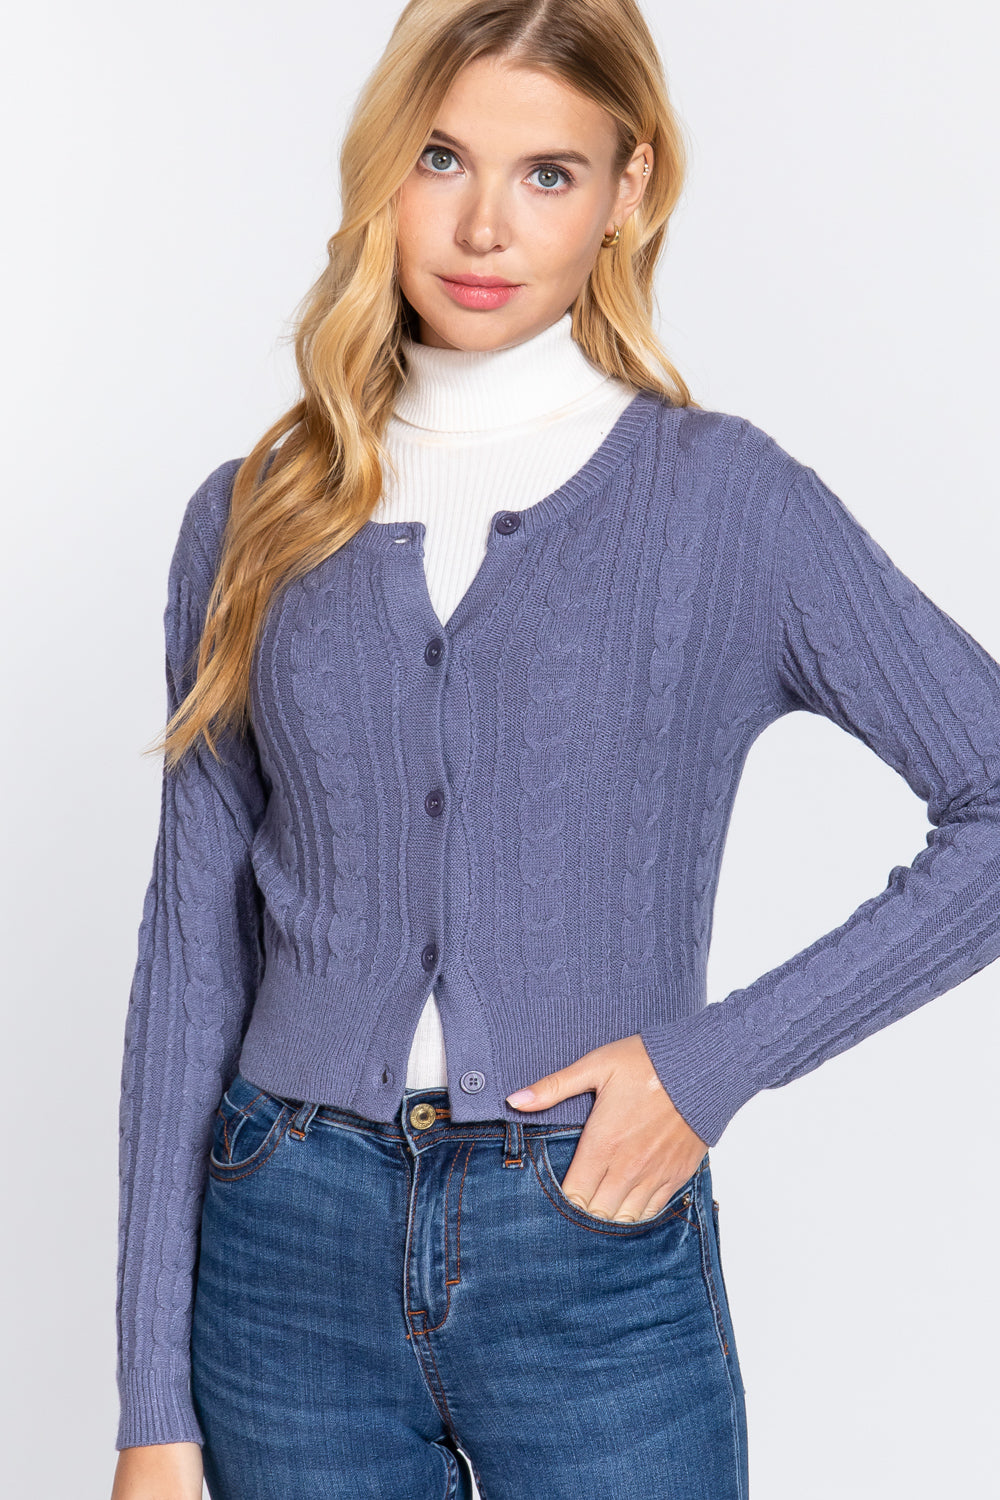 - Crew Neck Cable Sweater Cardigan - 4 colors - womens cardigan at TFC&H Co.